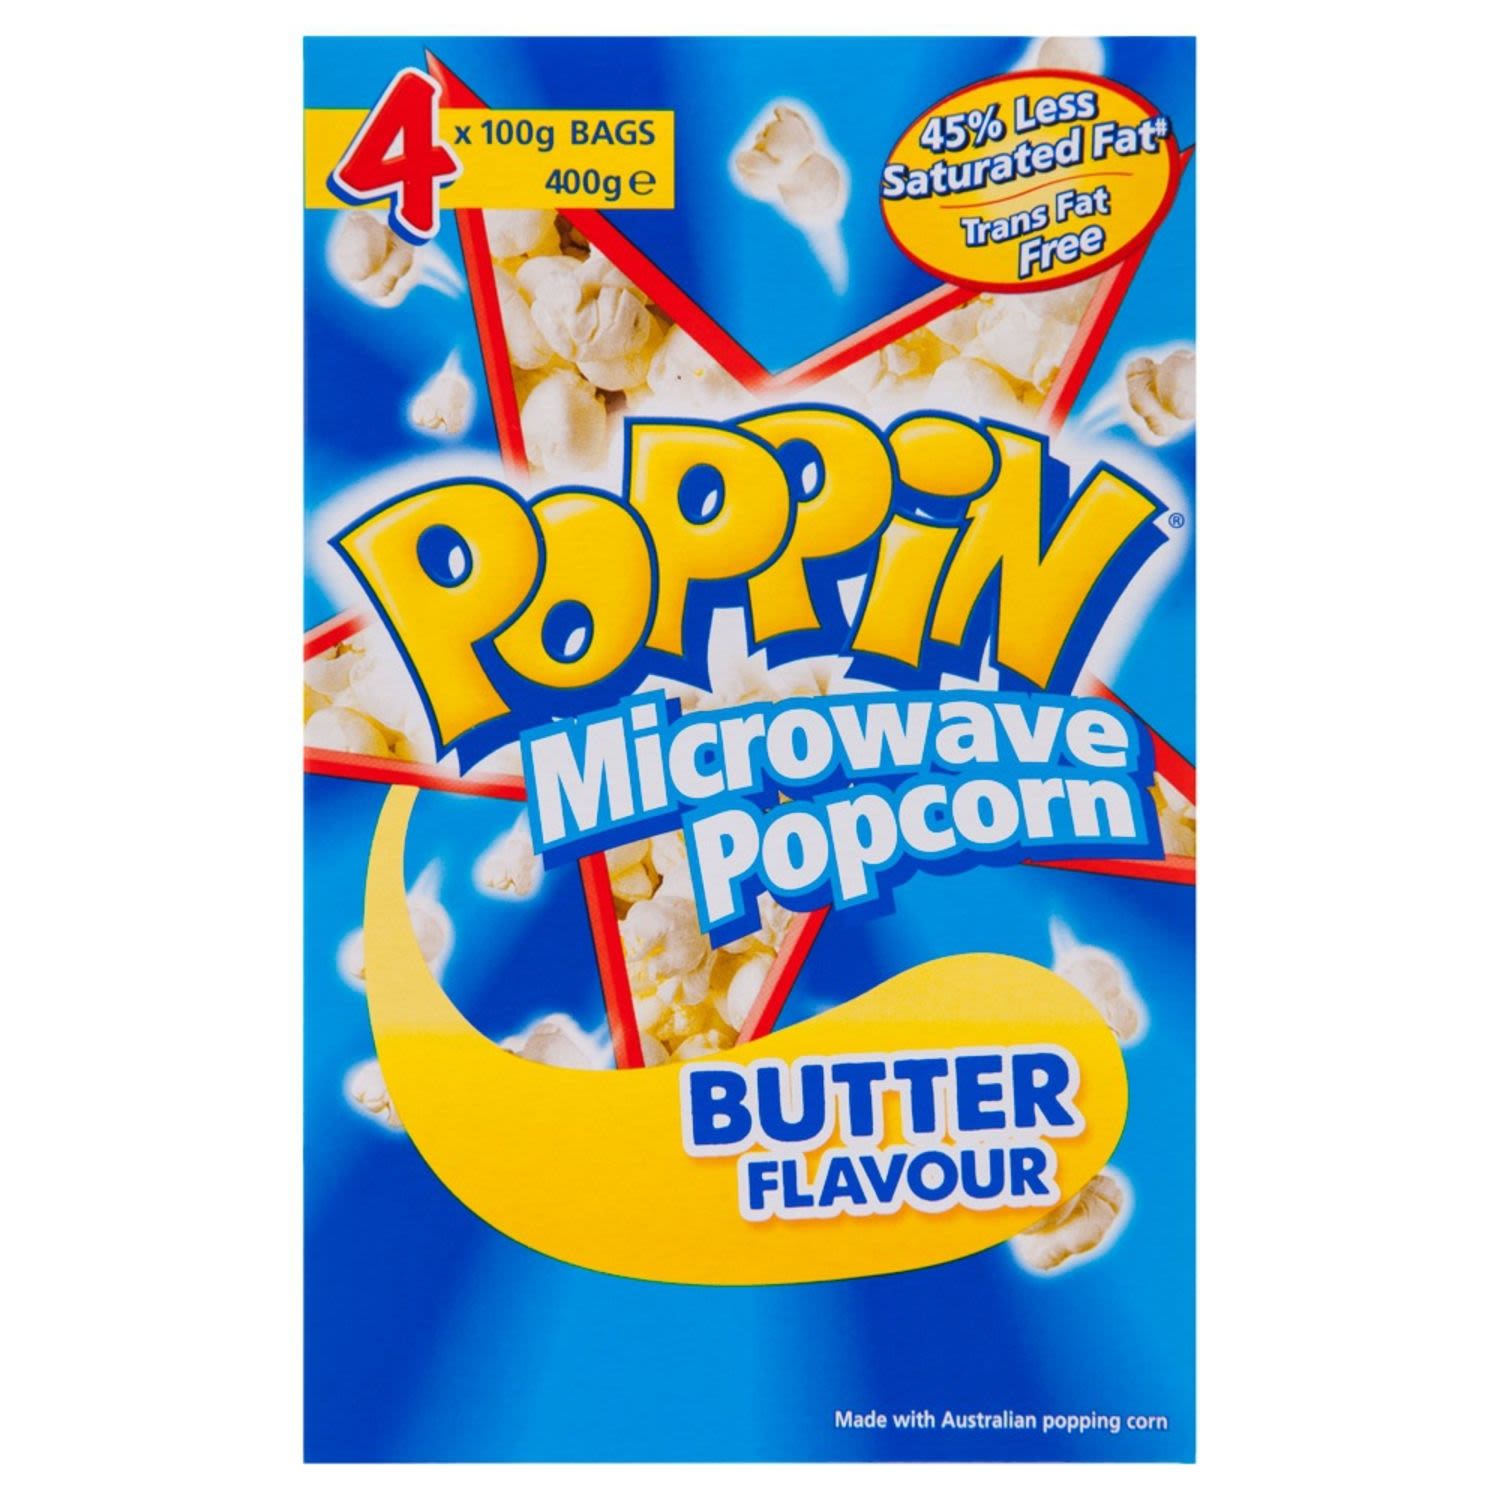 Poppin Microwave Popcorn Butter Flavour, 4 Each